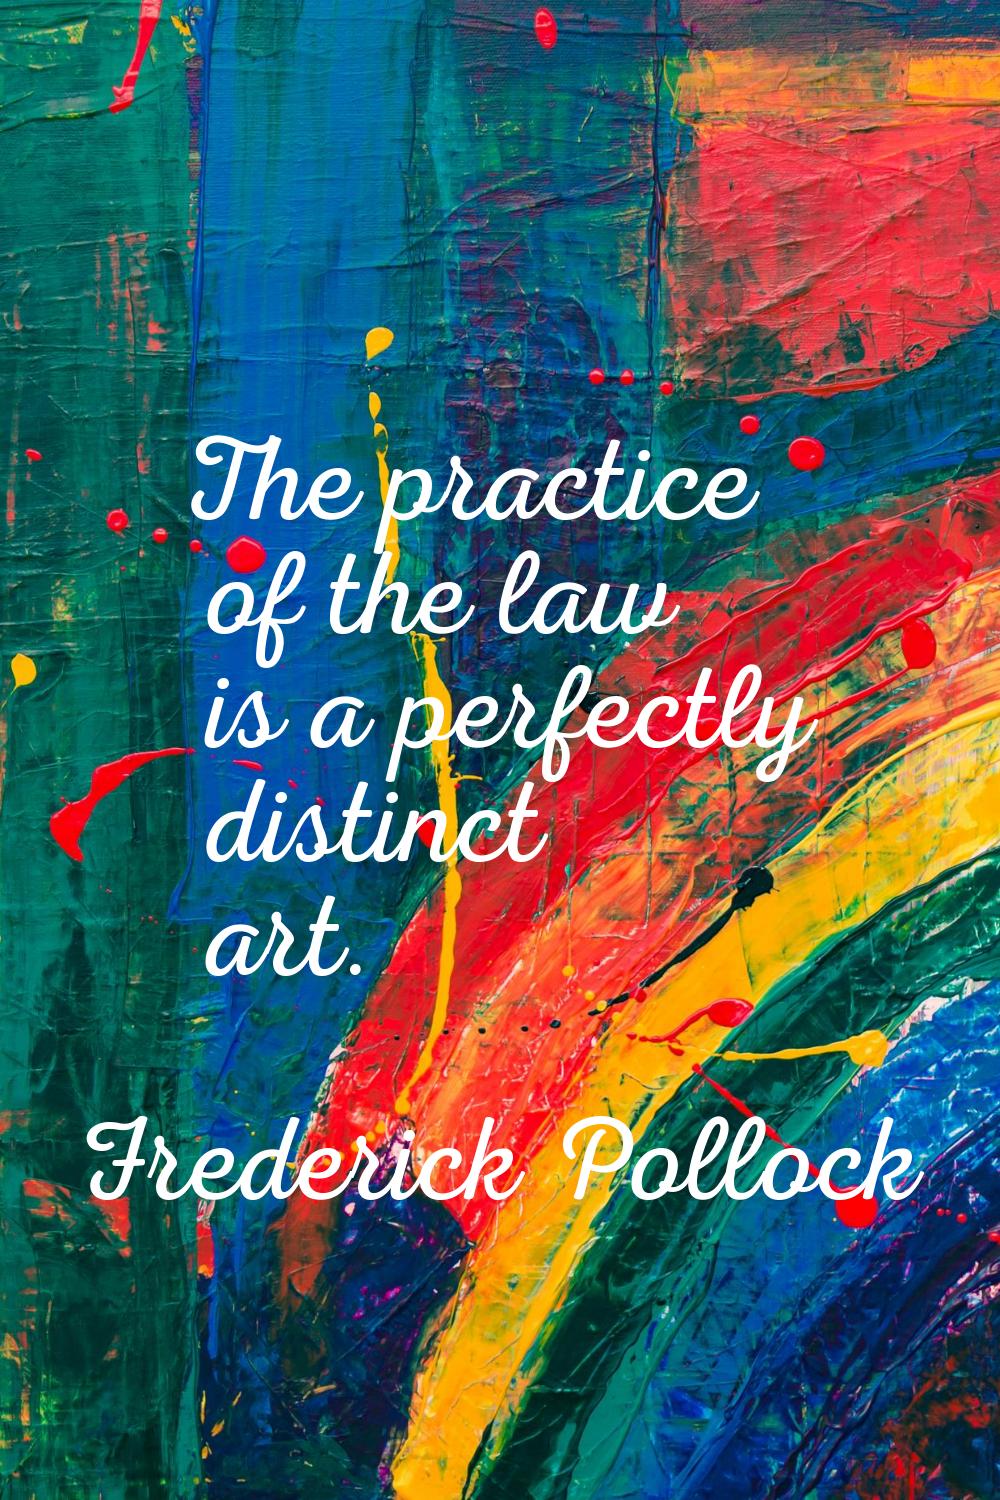 The practice of the law is a perfectly distinct art.